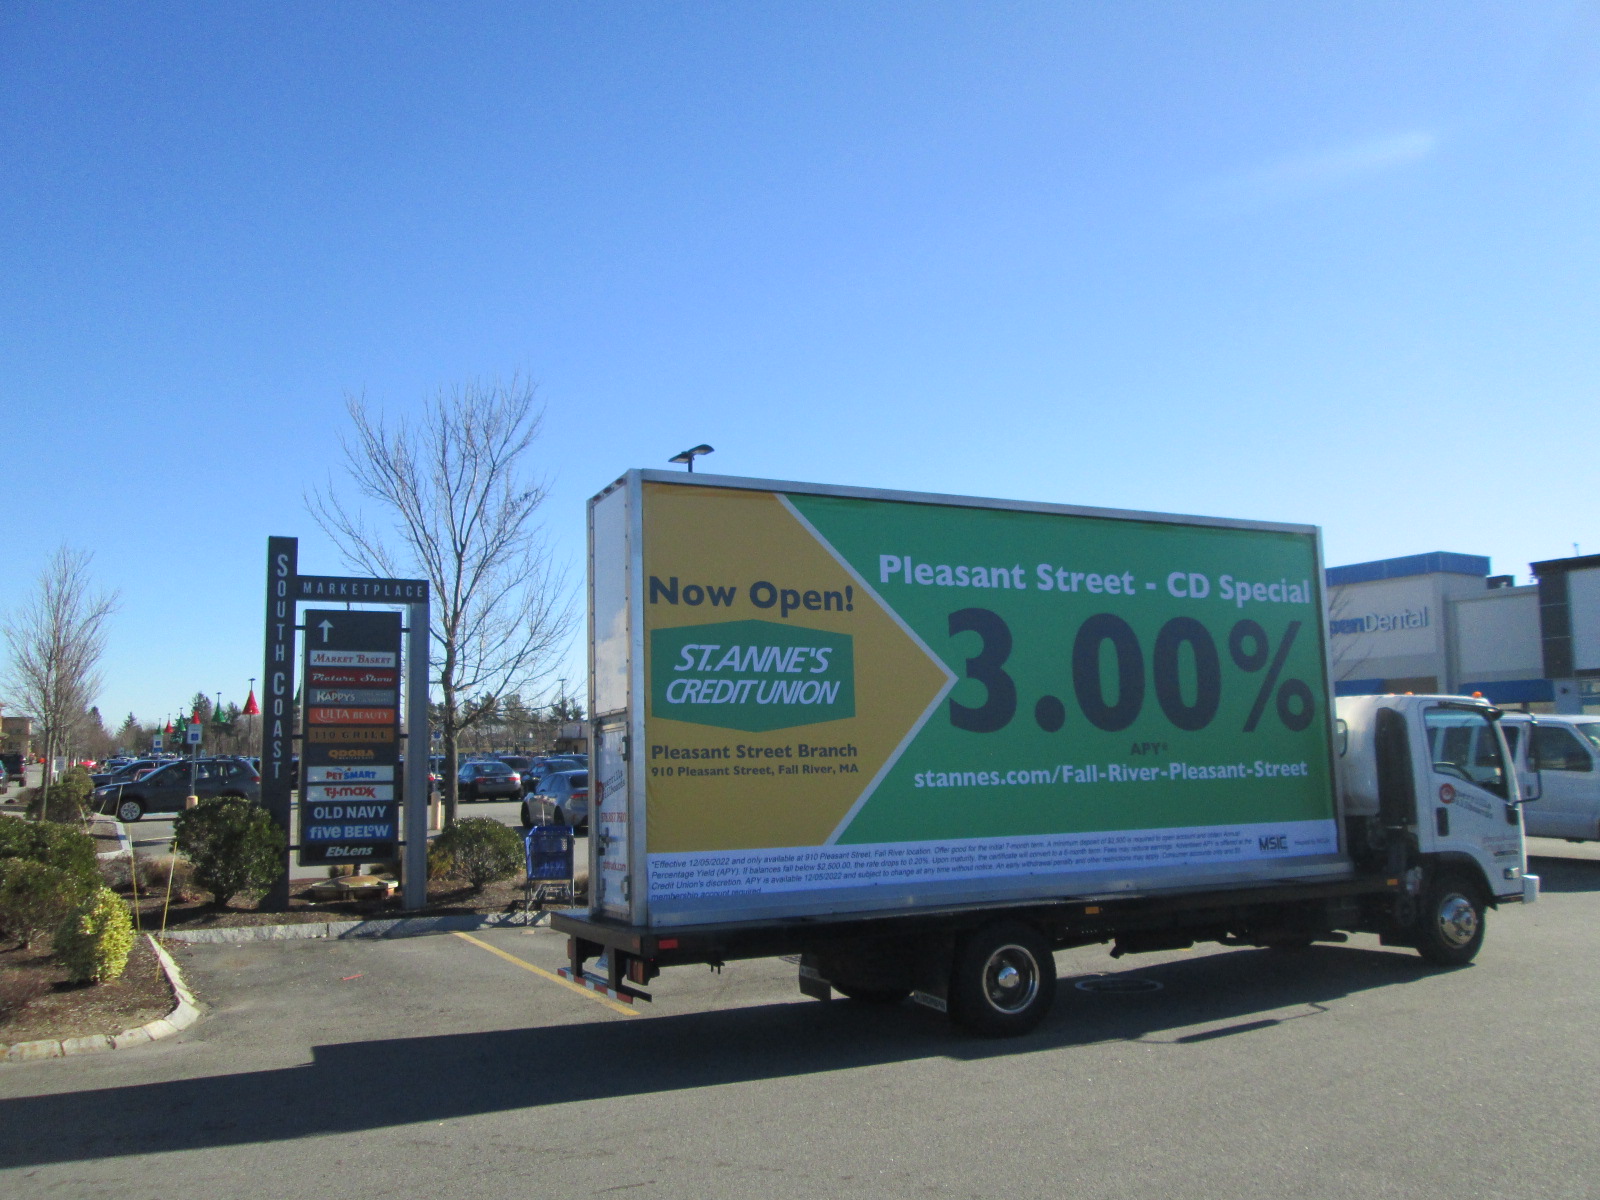 Mobile billboard truck promoting a special interest rate for CD's